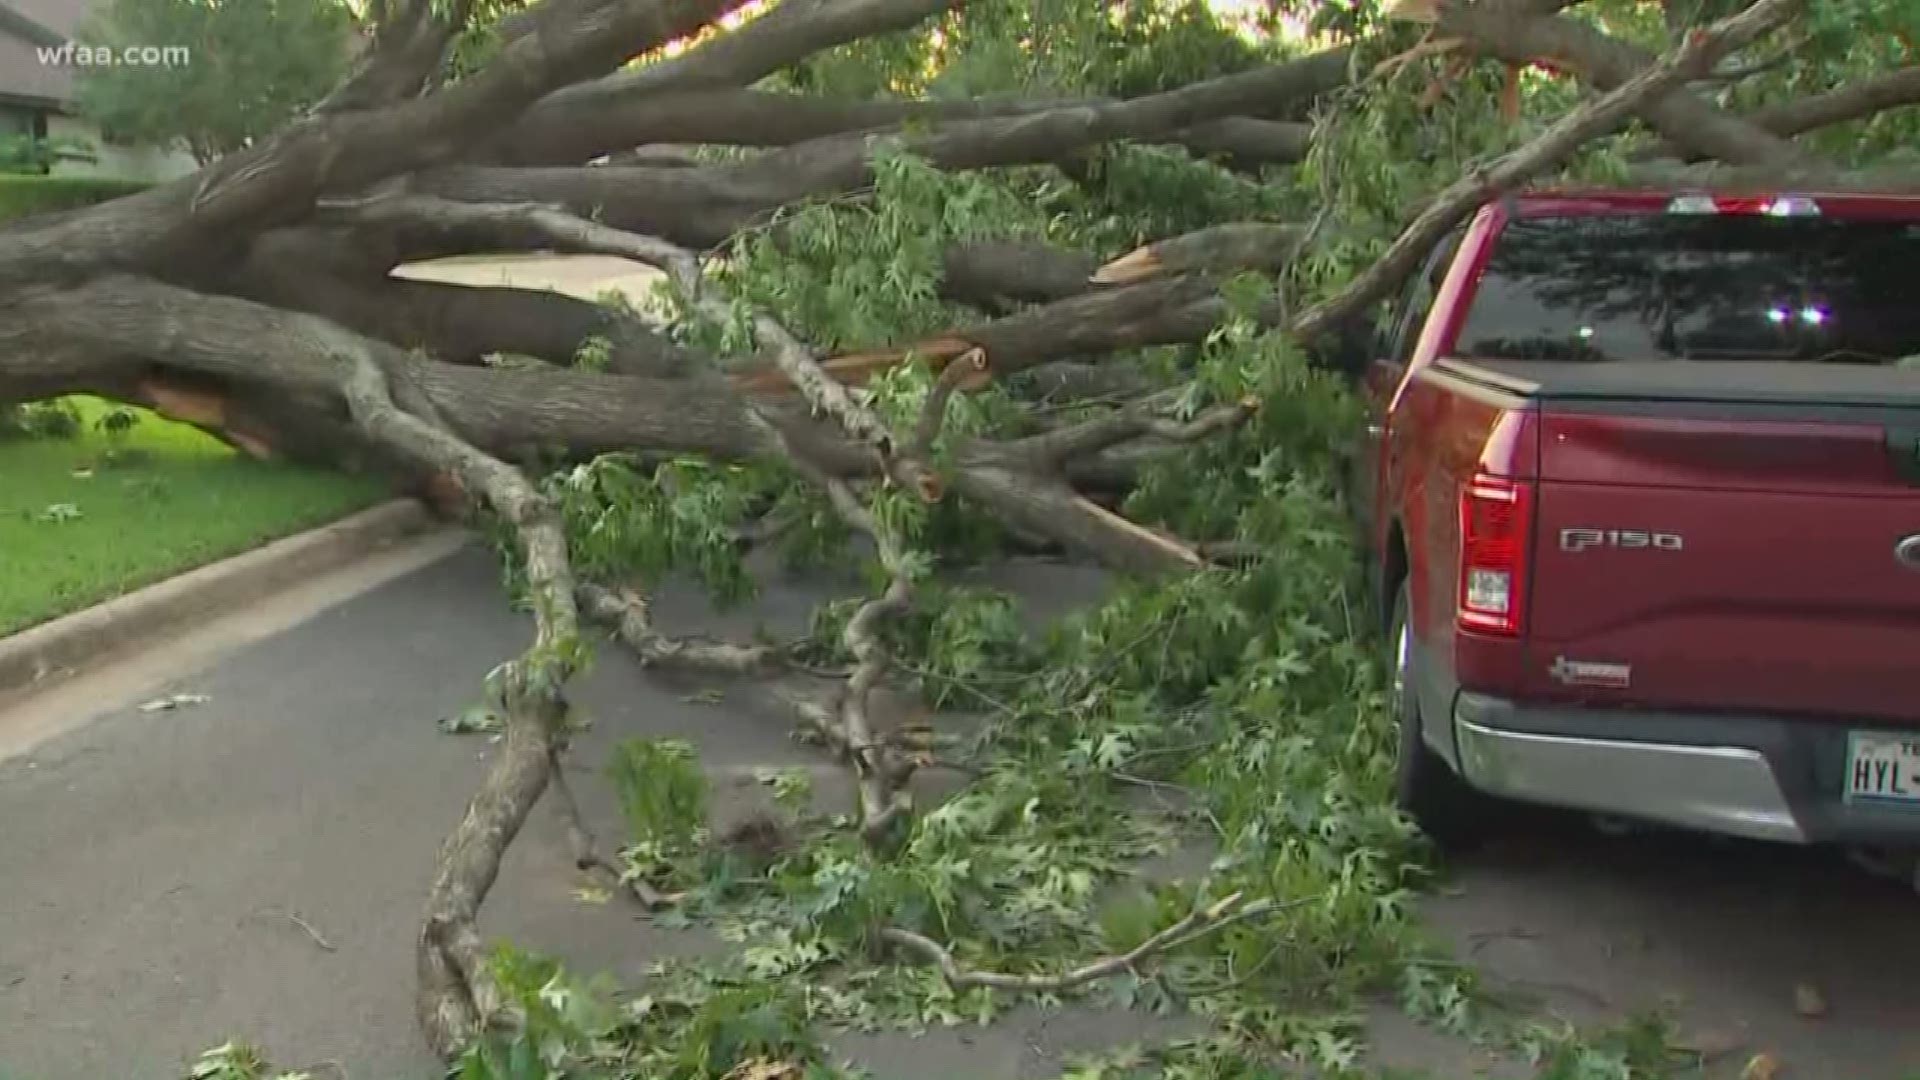 Power is still out, tree limbs litter streets: Oncor gives updates on outages